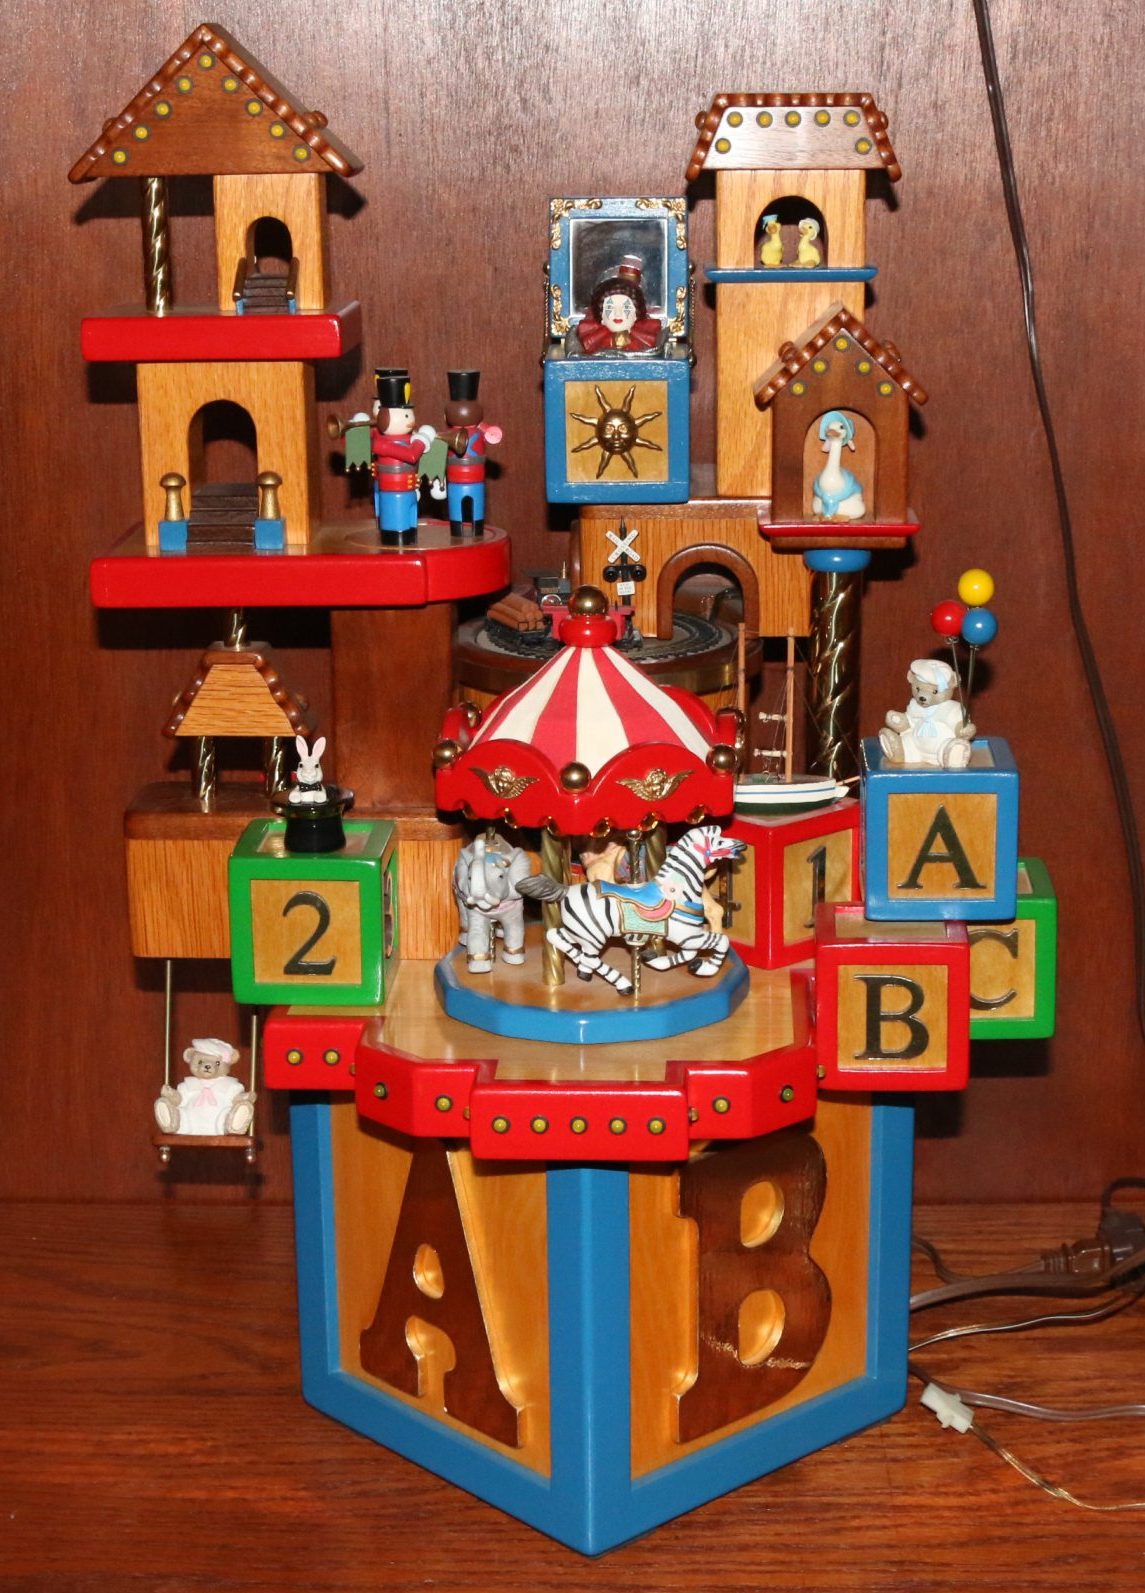 Donald's second music box, "Toy Land."